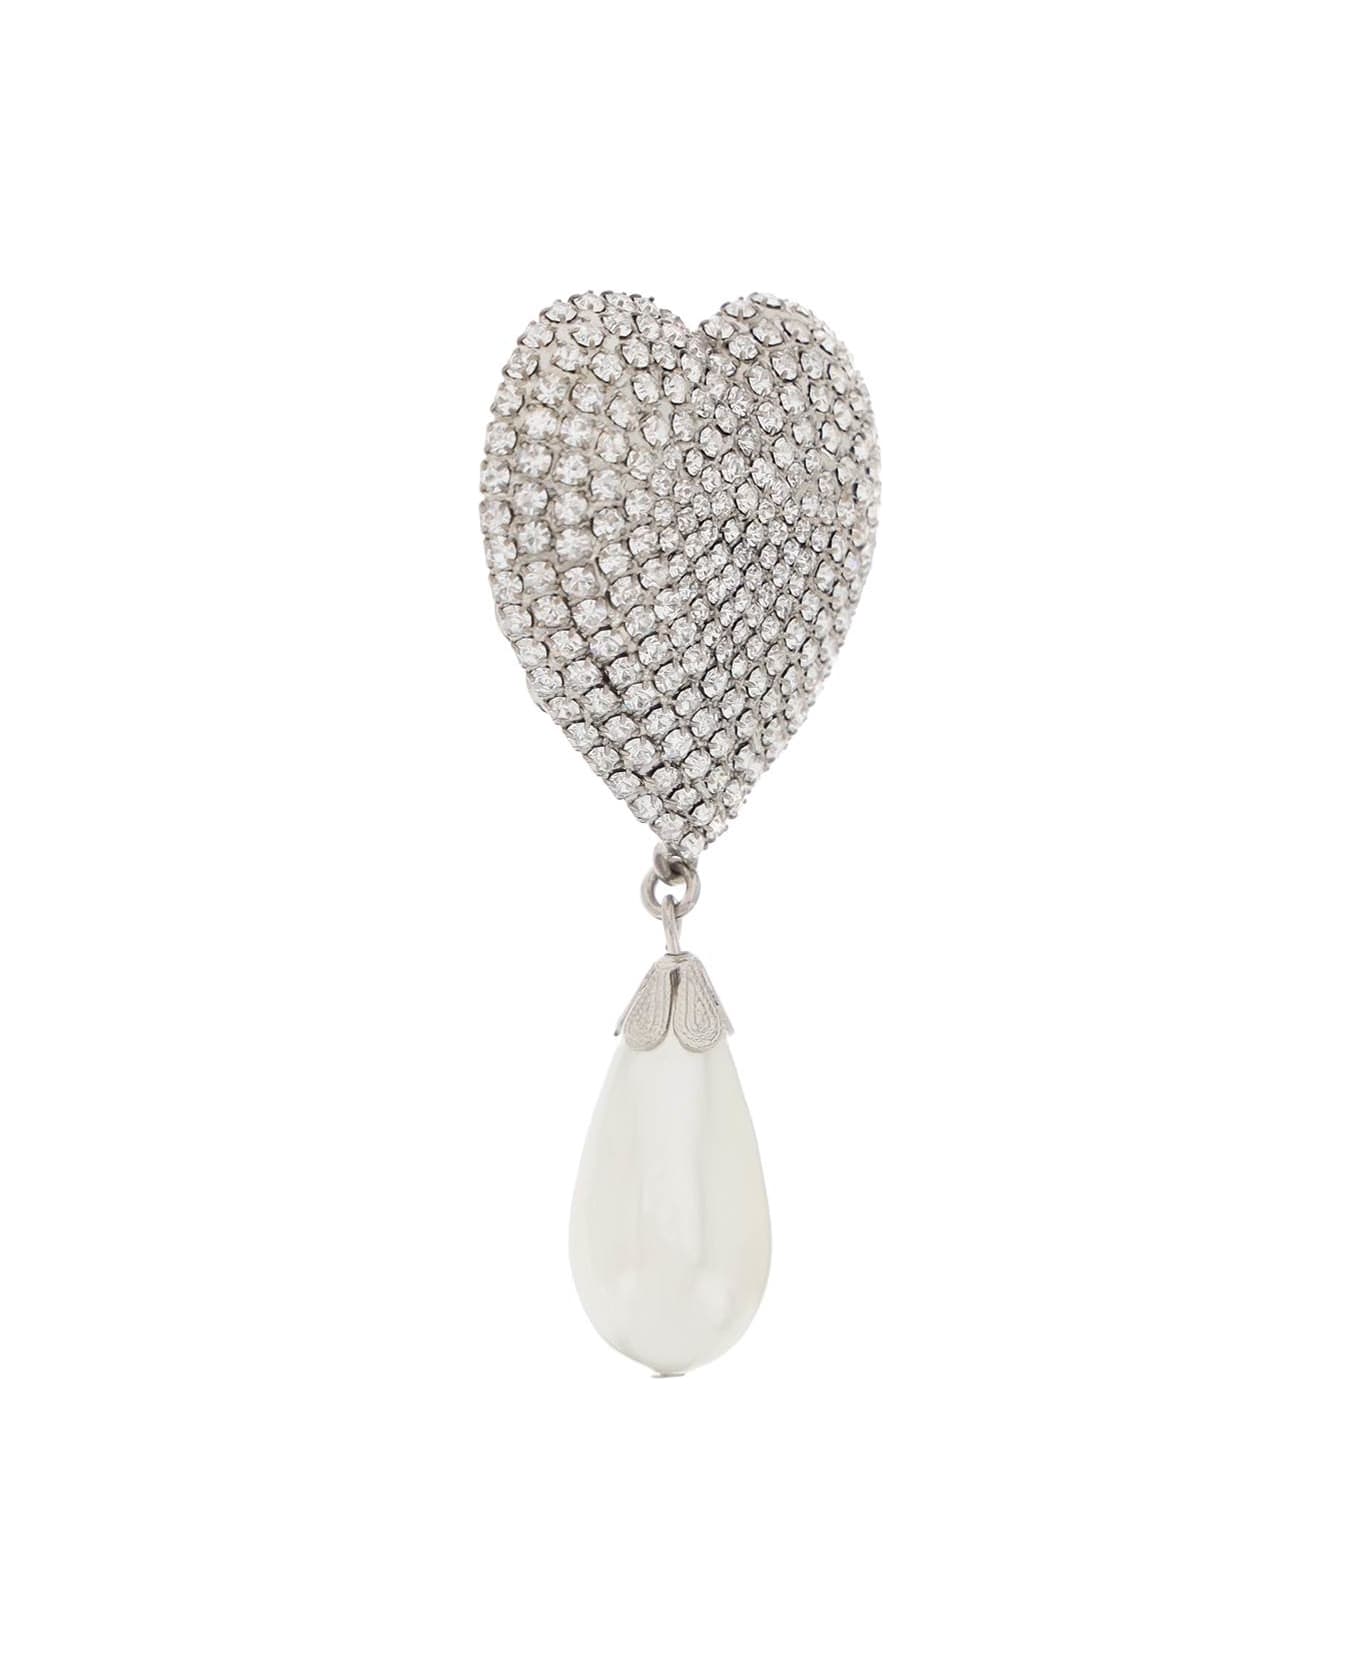 Alessandra Rich Heart Crystal Earrings With Pearls - CRY SILVER (Silver)